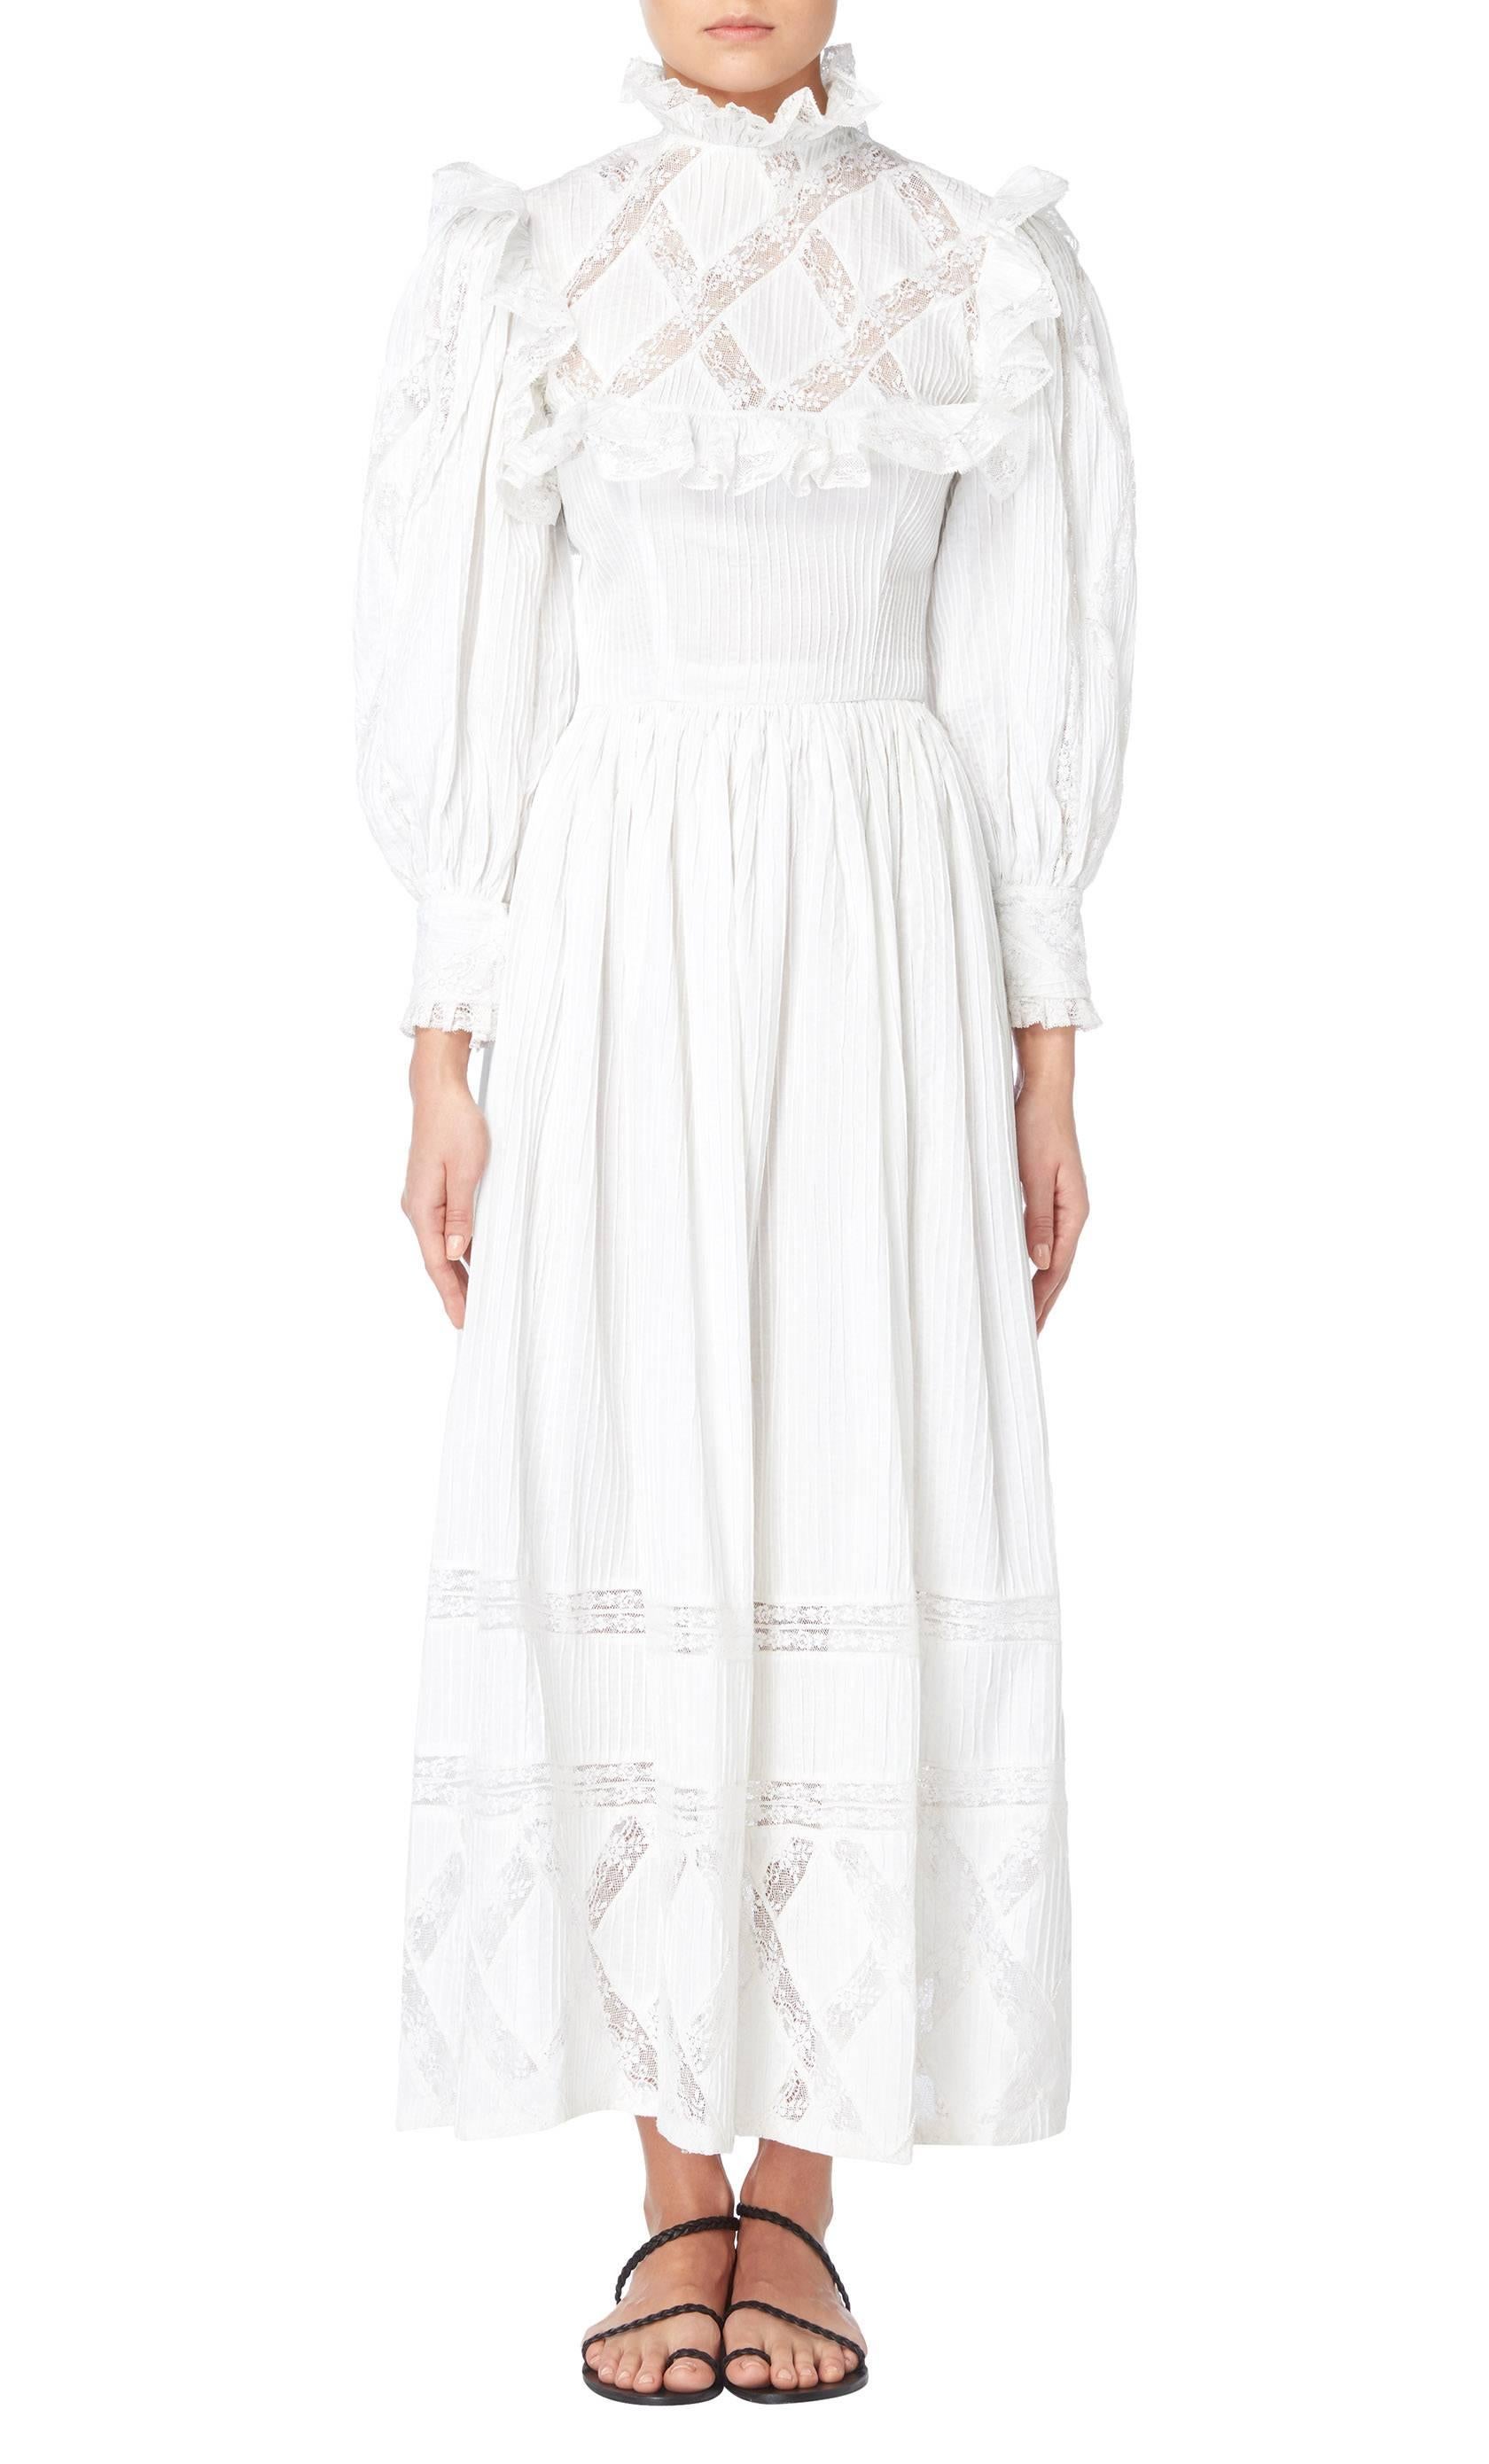 Constructed in white cotton, this high neck maxi dress features long puffed sleeves and a pie crust collar. With a fitted bodice and flared skirt, panels of sheer white lace run throughout the dress, while lace trim edges the neck and cuffs.